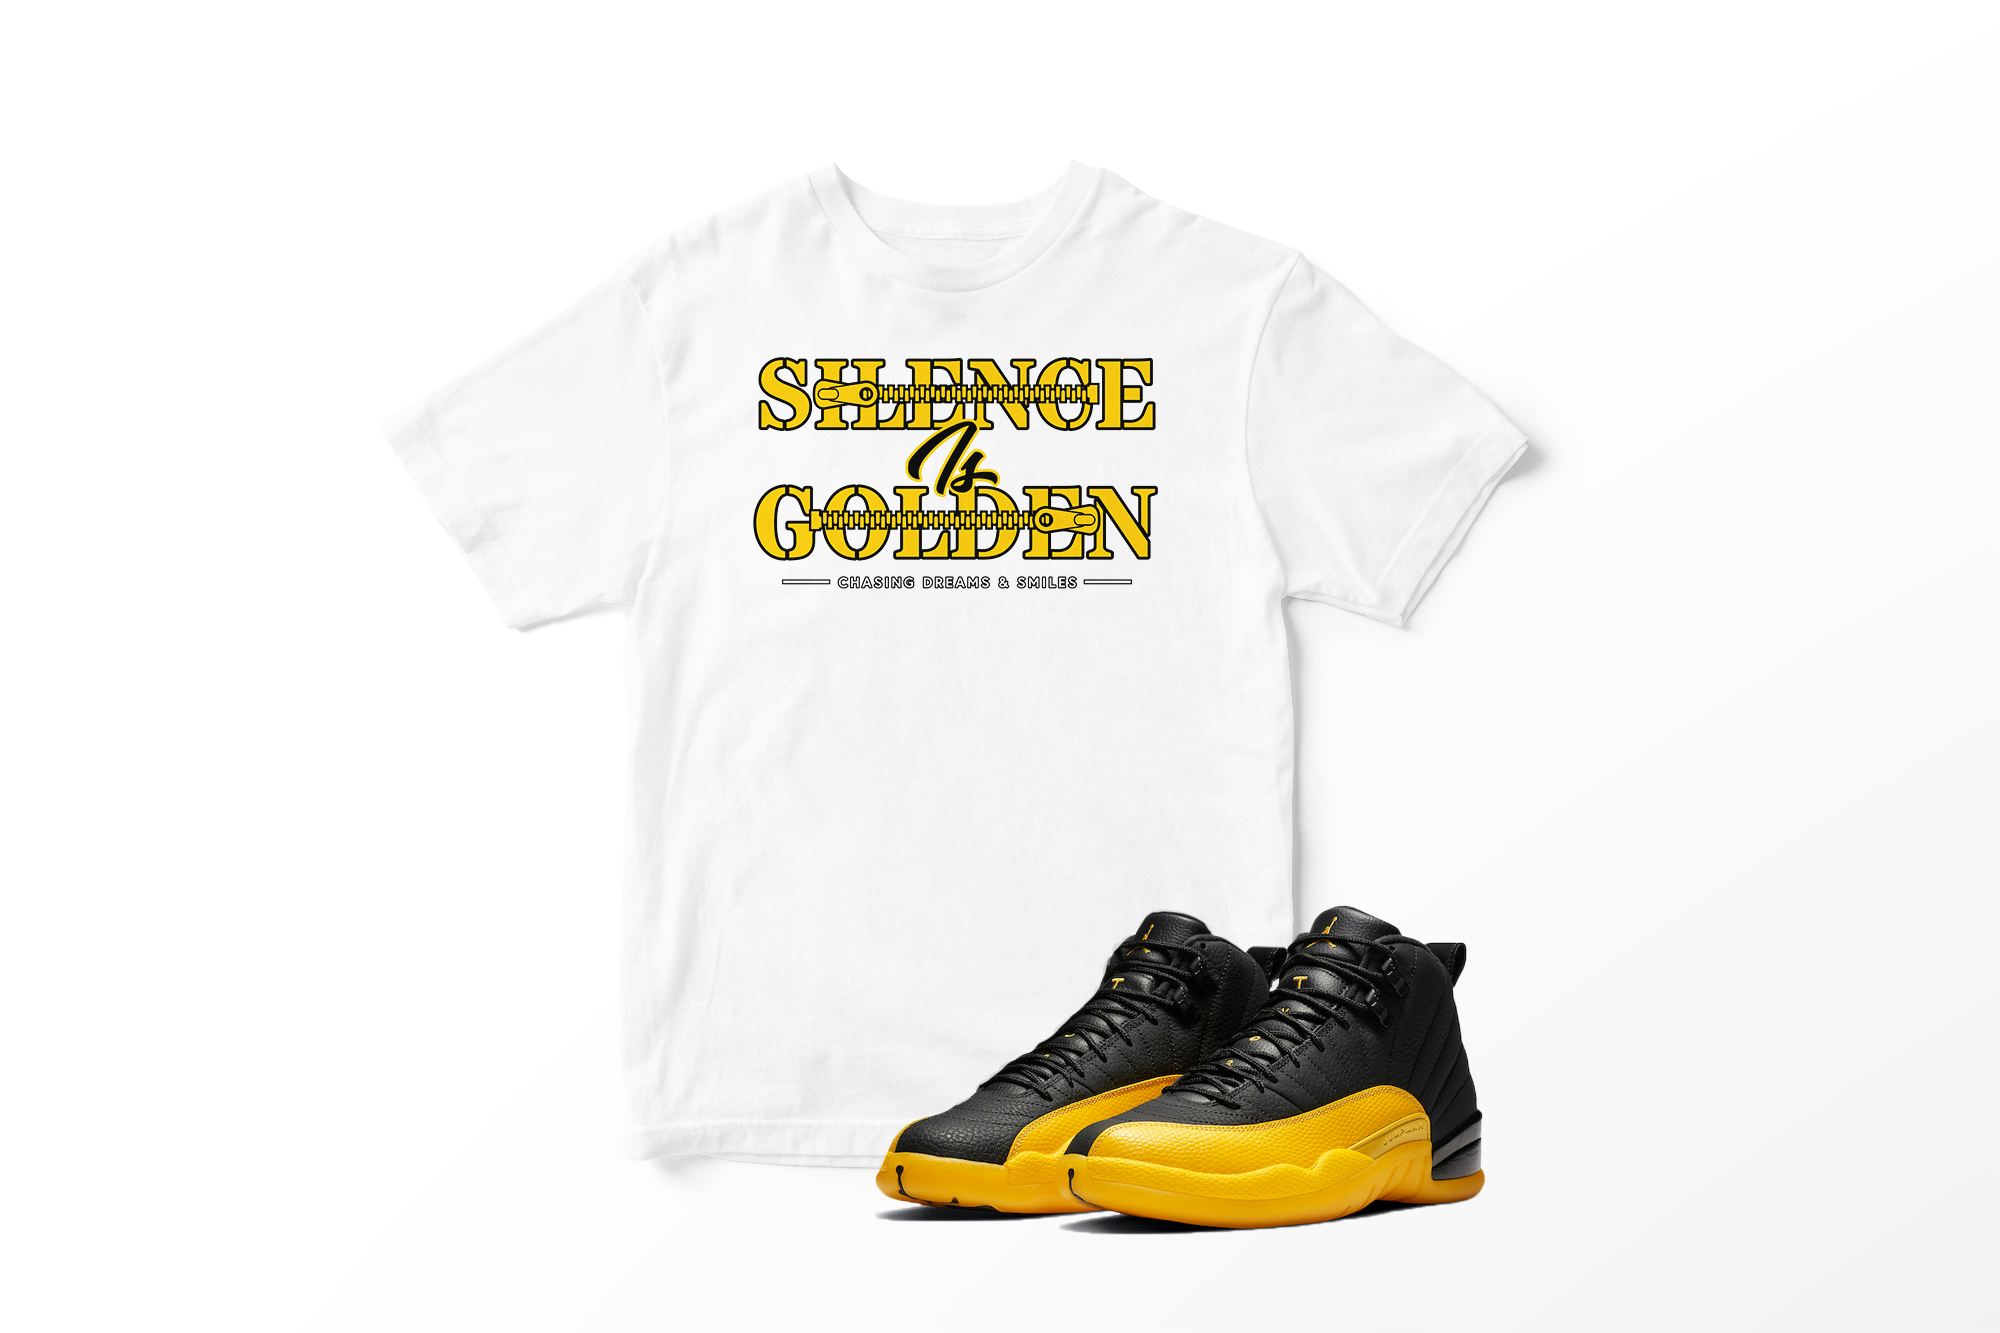 'Silence Is Golden' in University Gold CW Short Sleeve Tee